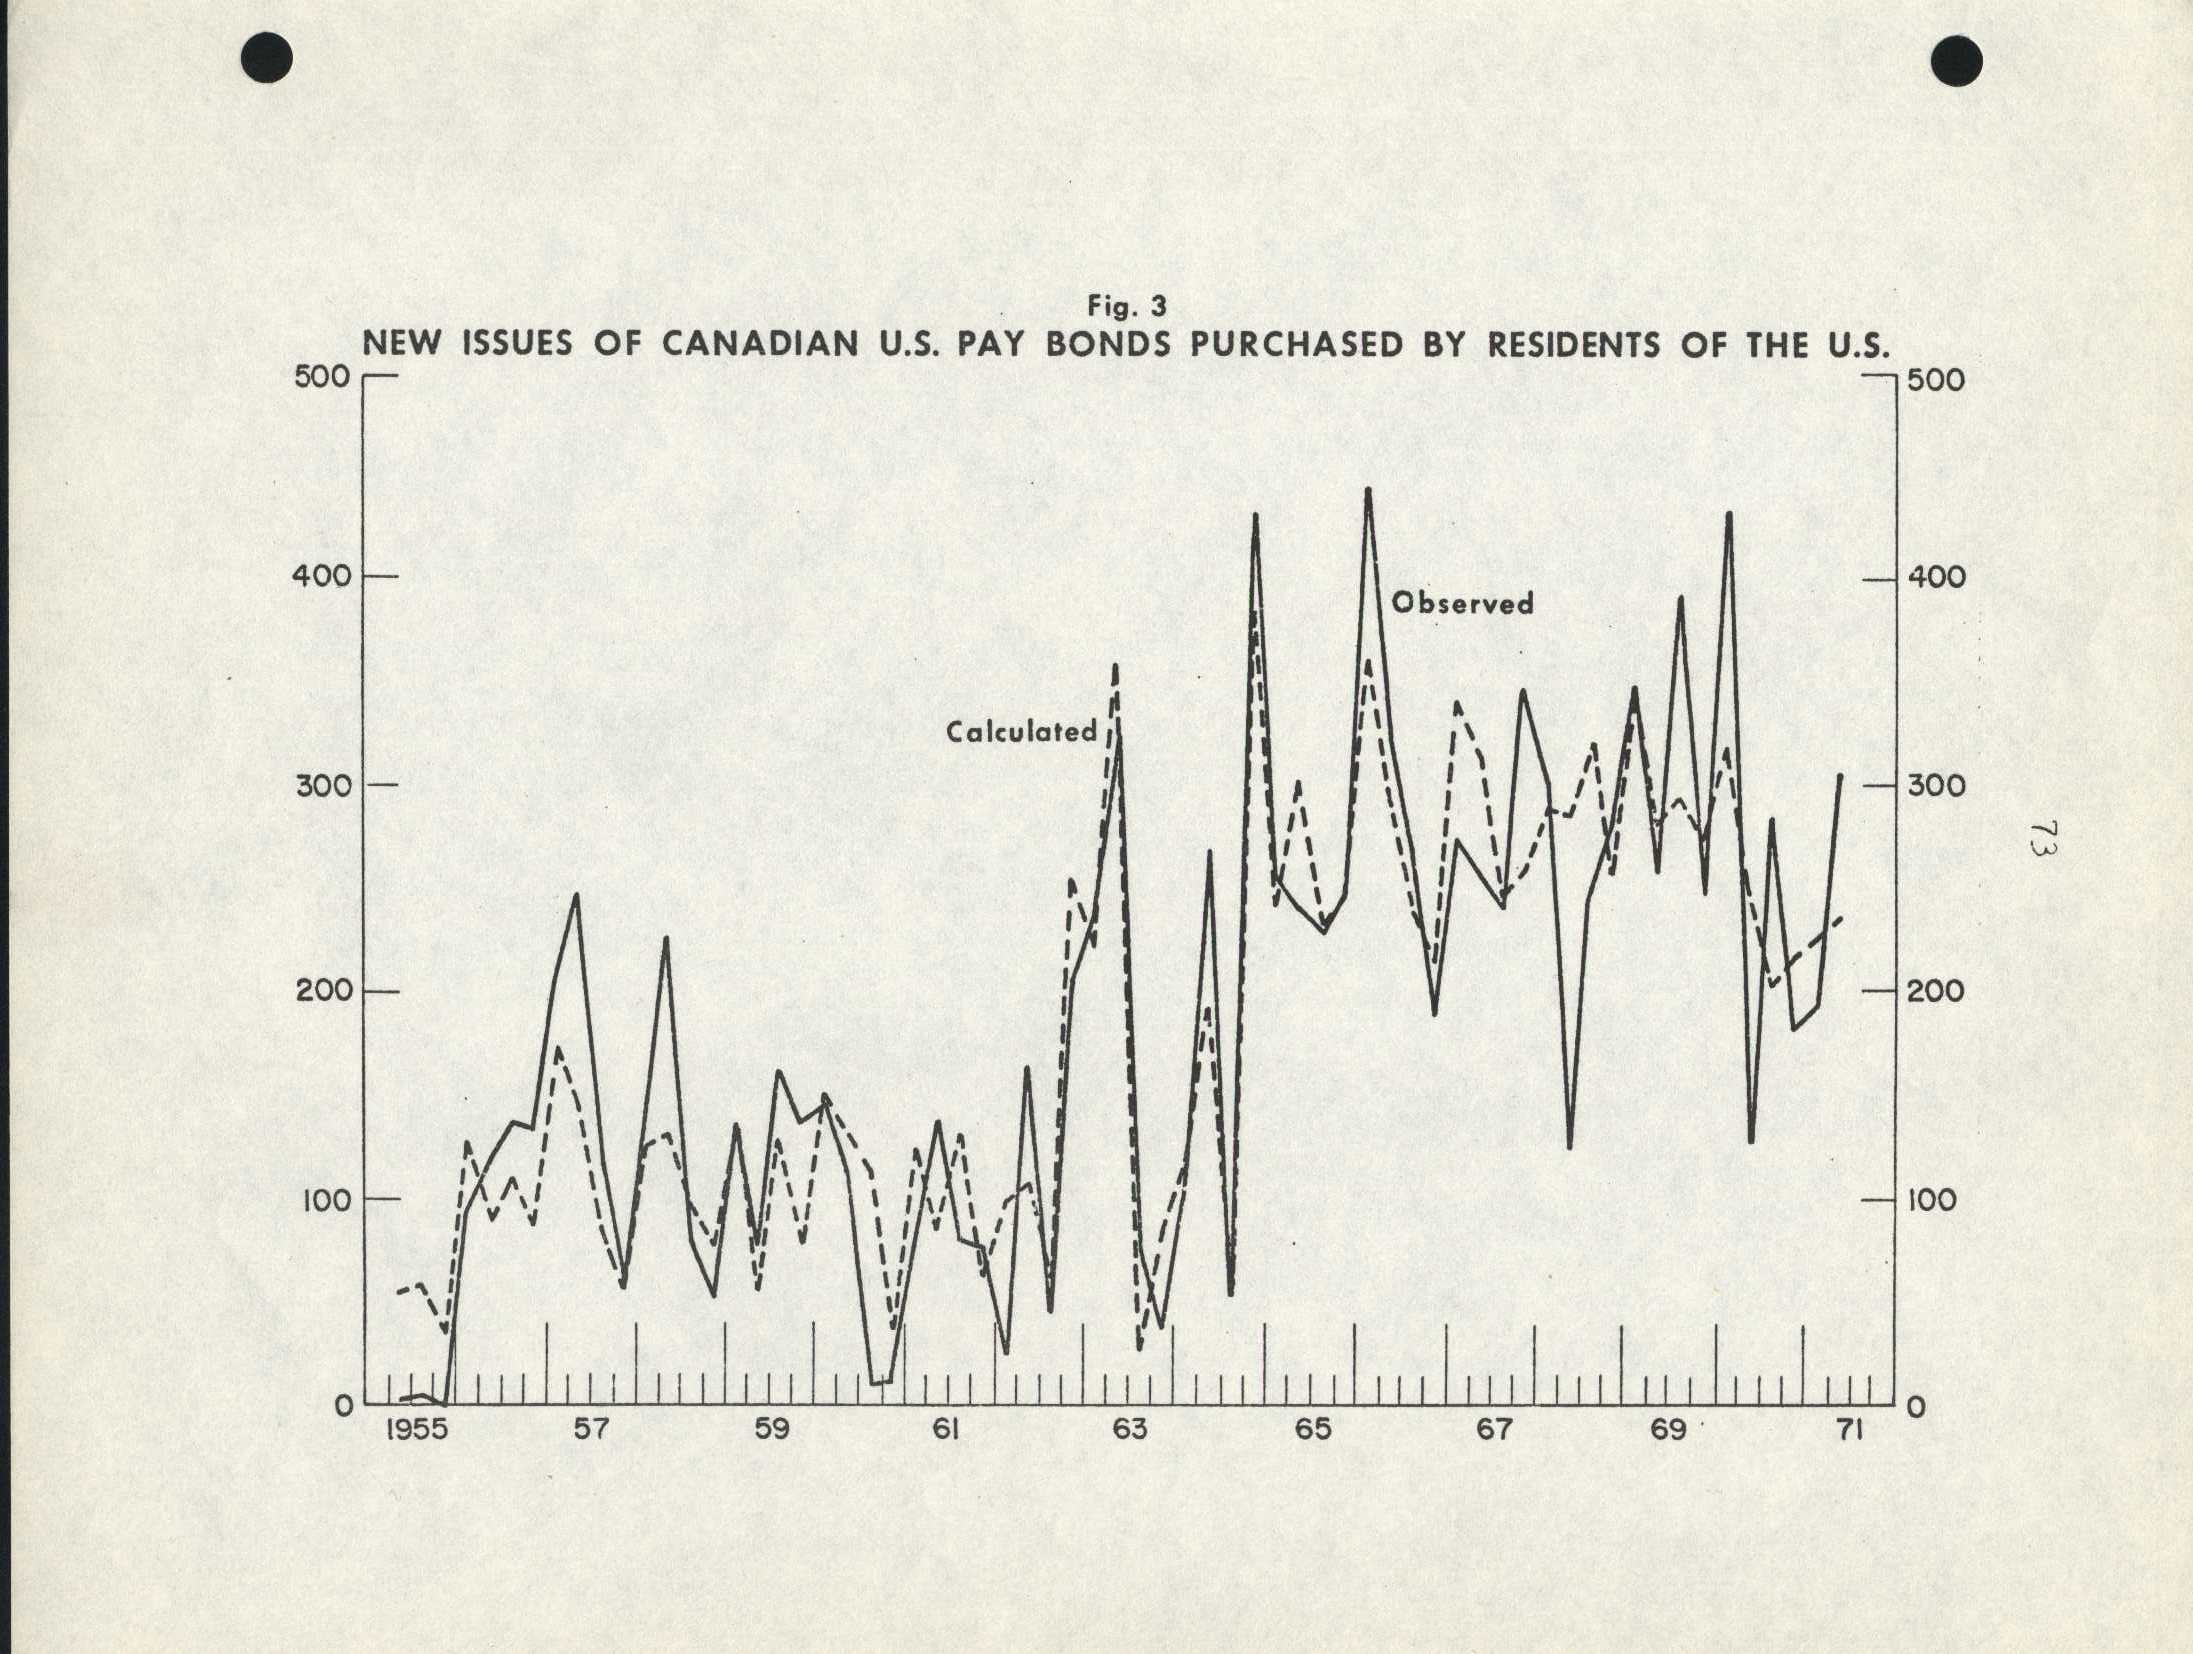 Figure 3 - New Issues of Canadian Pay Bonds Purchased by Residents of the U.S.